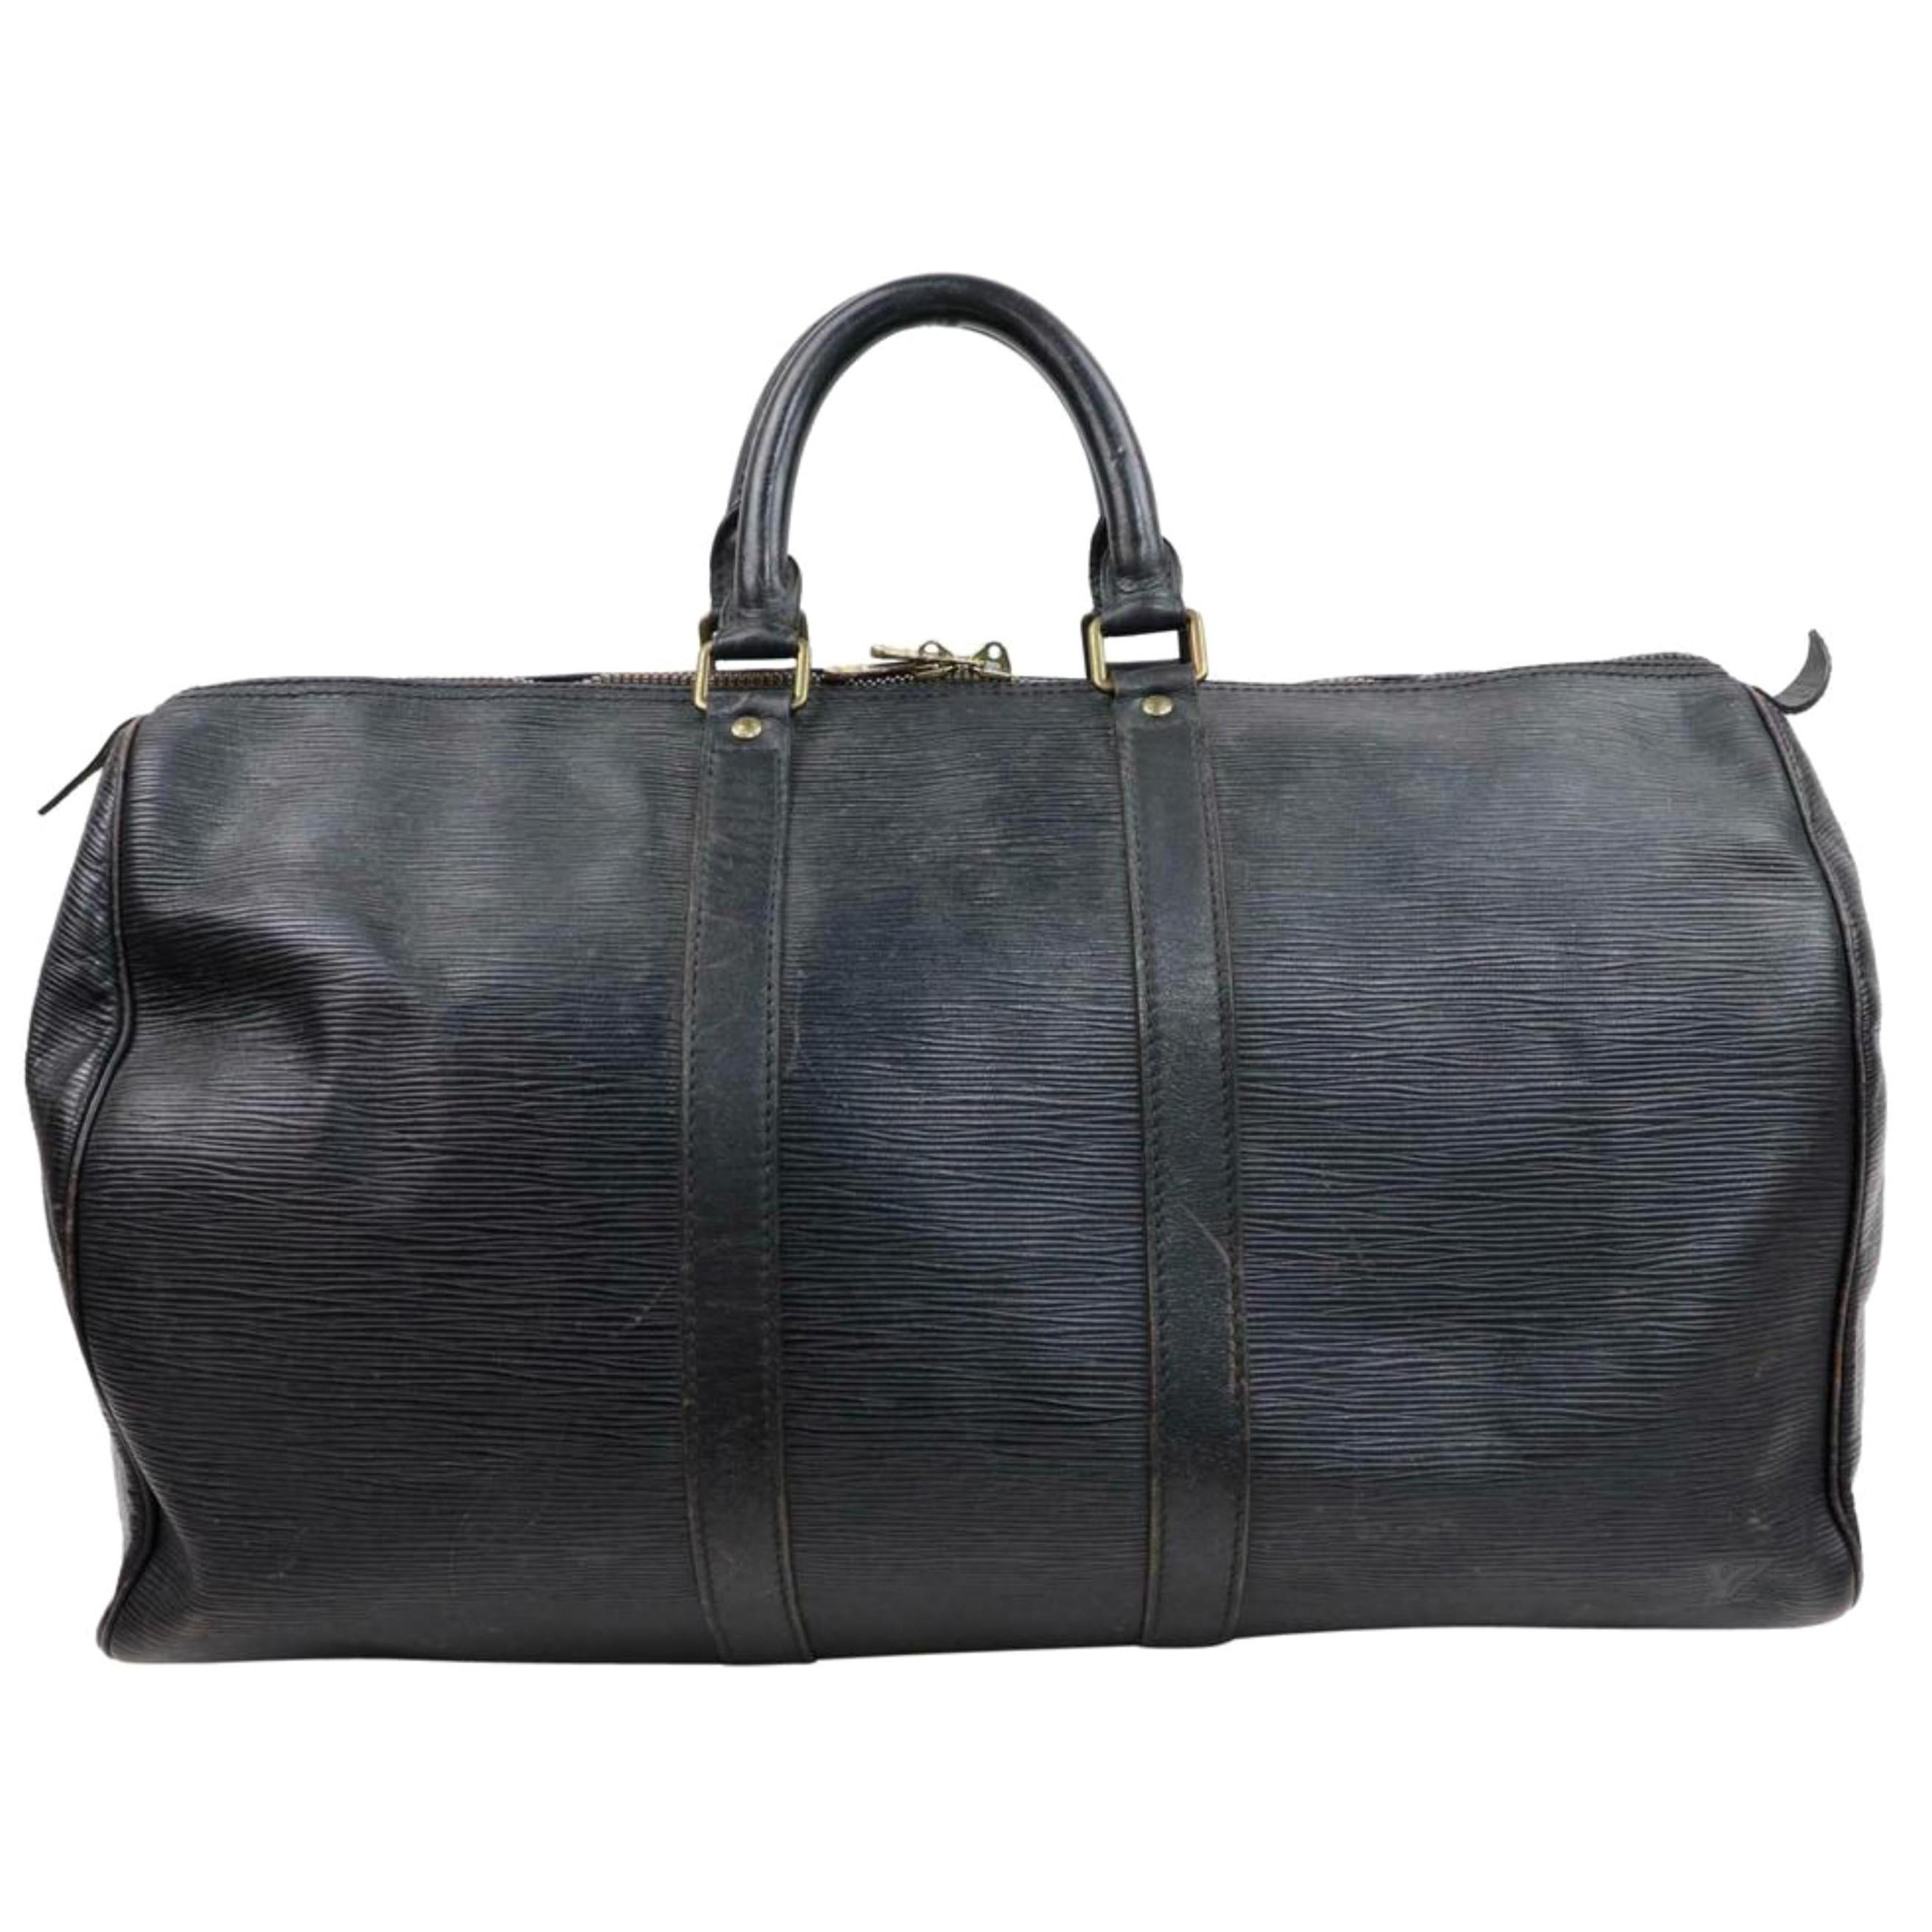 Louis Vuitton Keepall Duffle 45 Pm 870243 Black Leather Weekend/Travel Bag For Sale